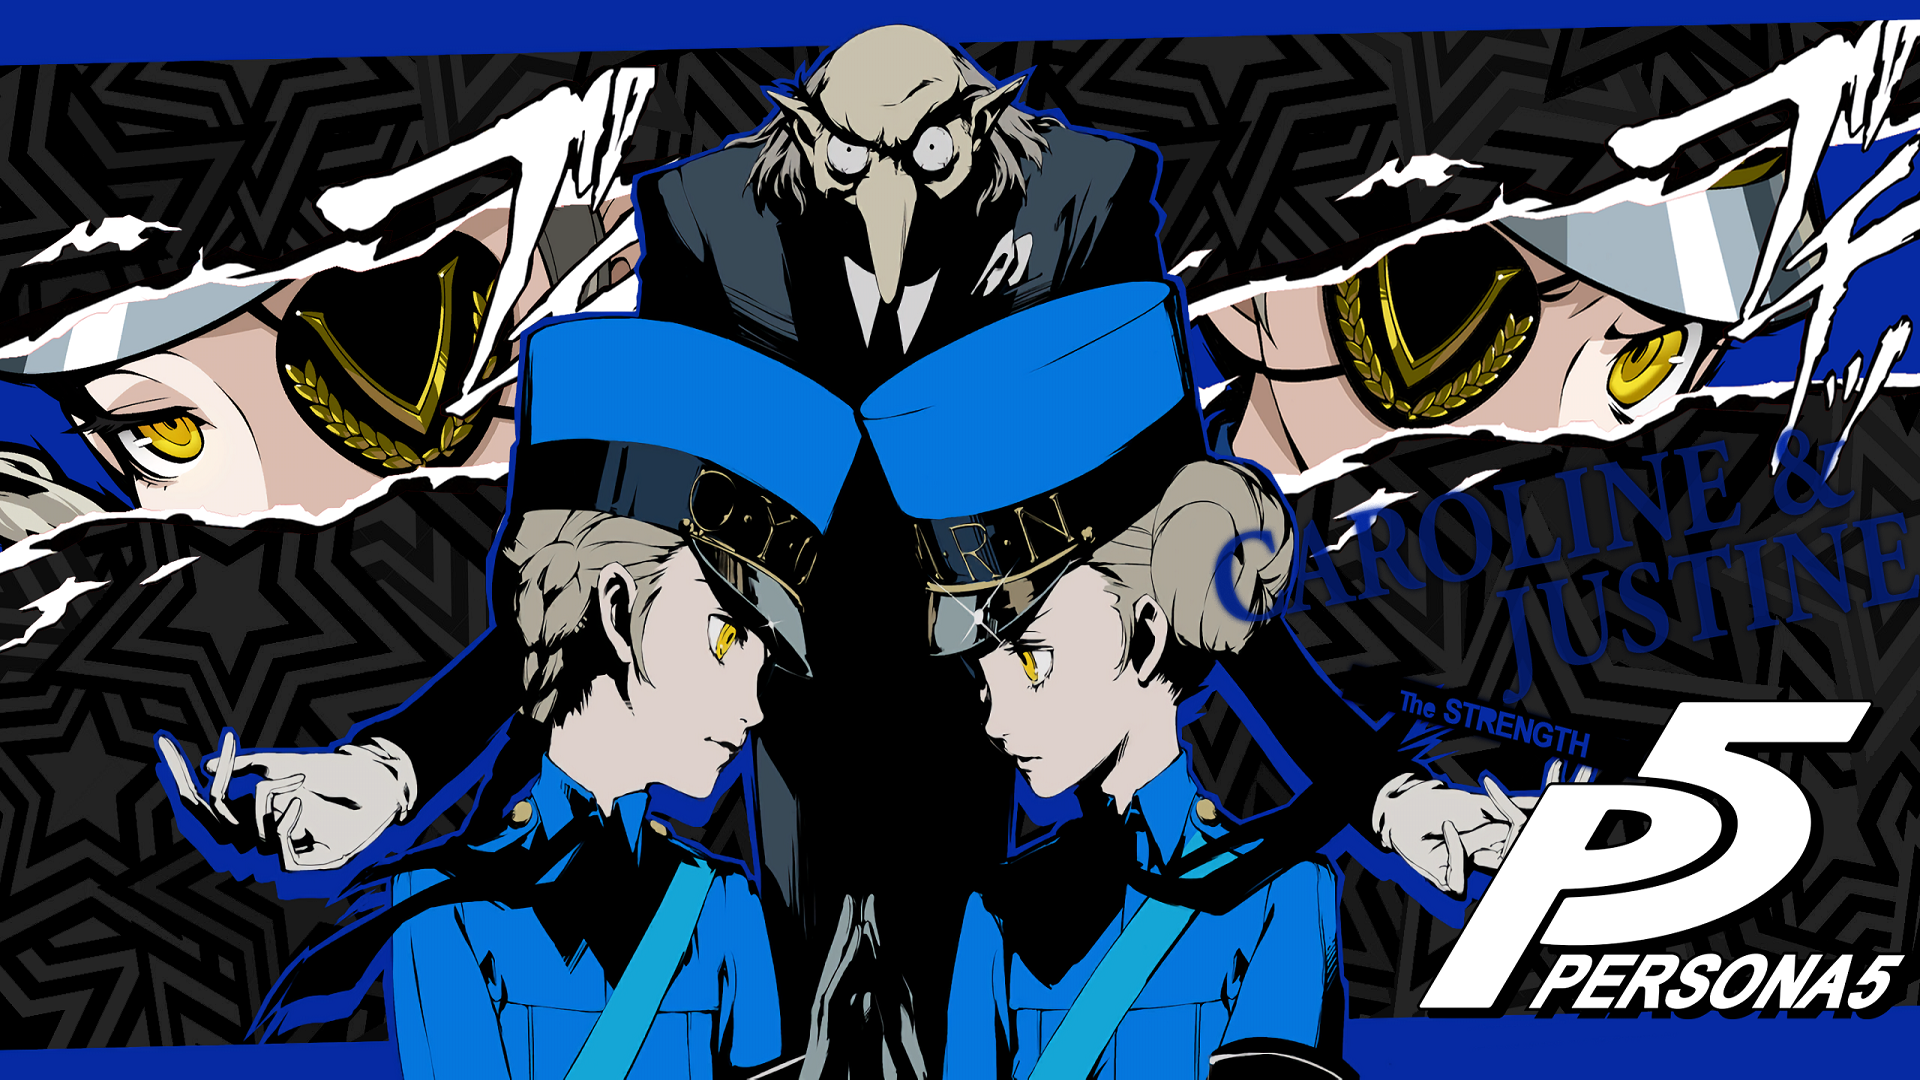 Persona 5 caroline and justine wallpaper – PS4Wallpapers.com